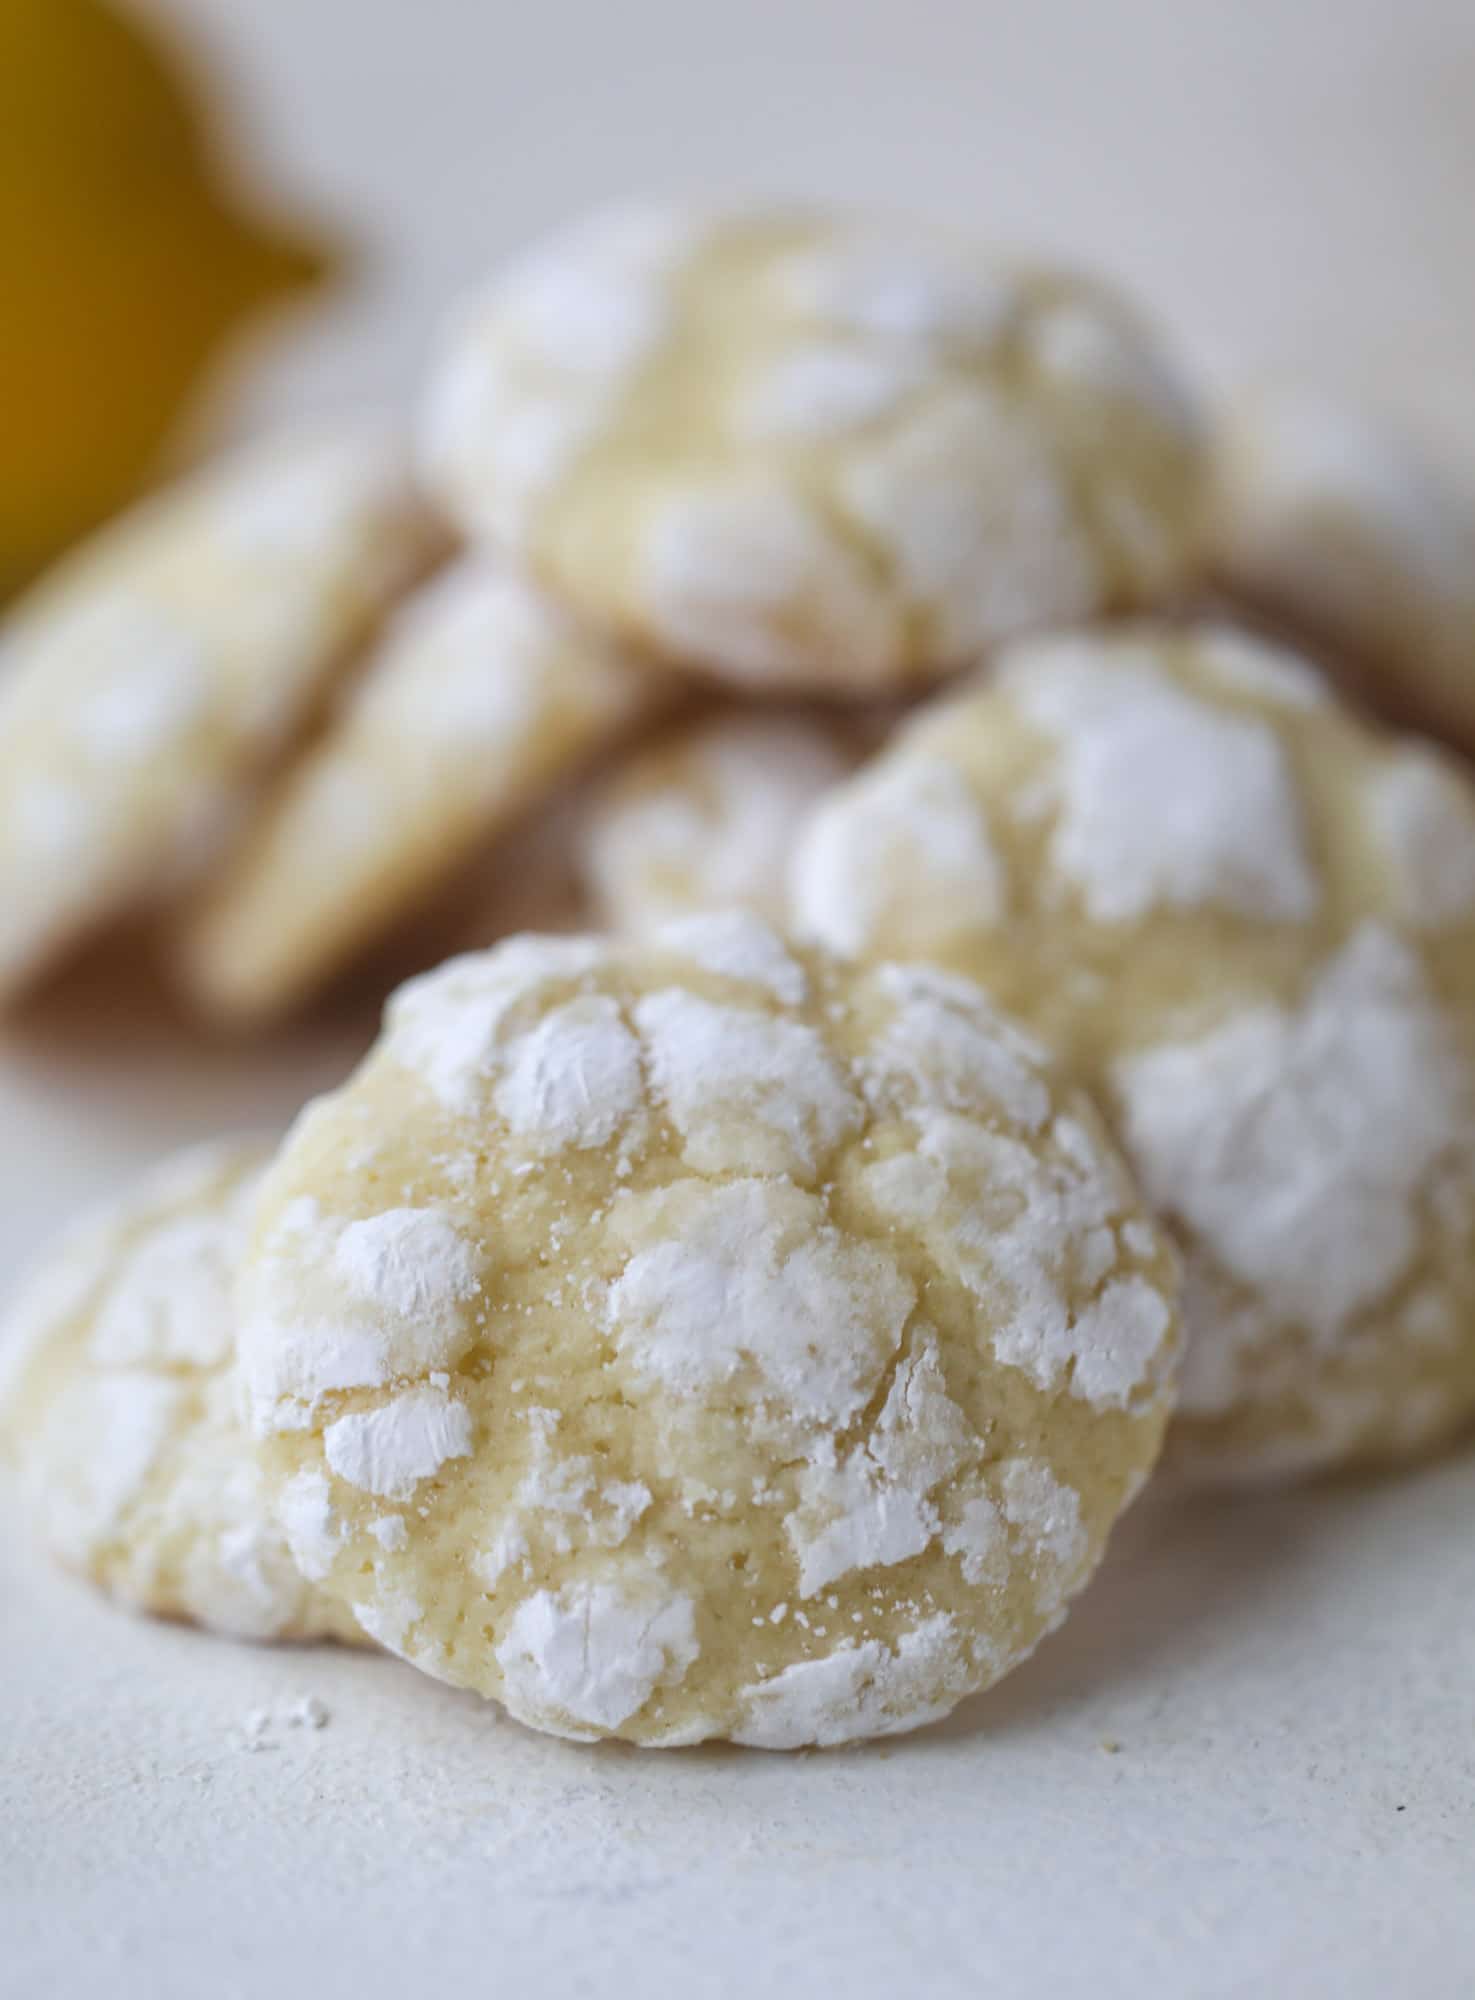 These lemon crinkle cookies are perfect if you love lemon desserts! They take after chocolate crinkle cookies, but are a delightful refreshing lemon flavor sprinkle with powdered sugar. These are always a huge hit! I howsweeteats.com #lemoncrinkle #cookies